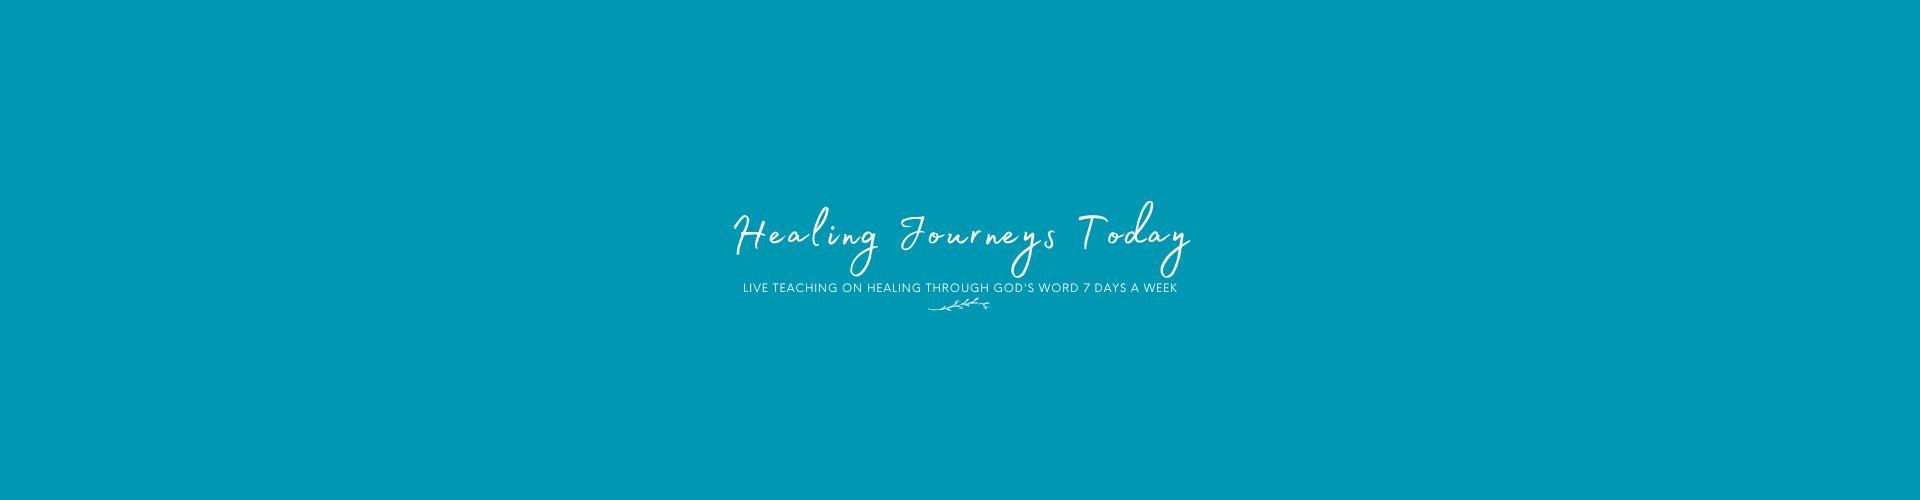 Healing Journeys Today Podcast